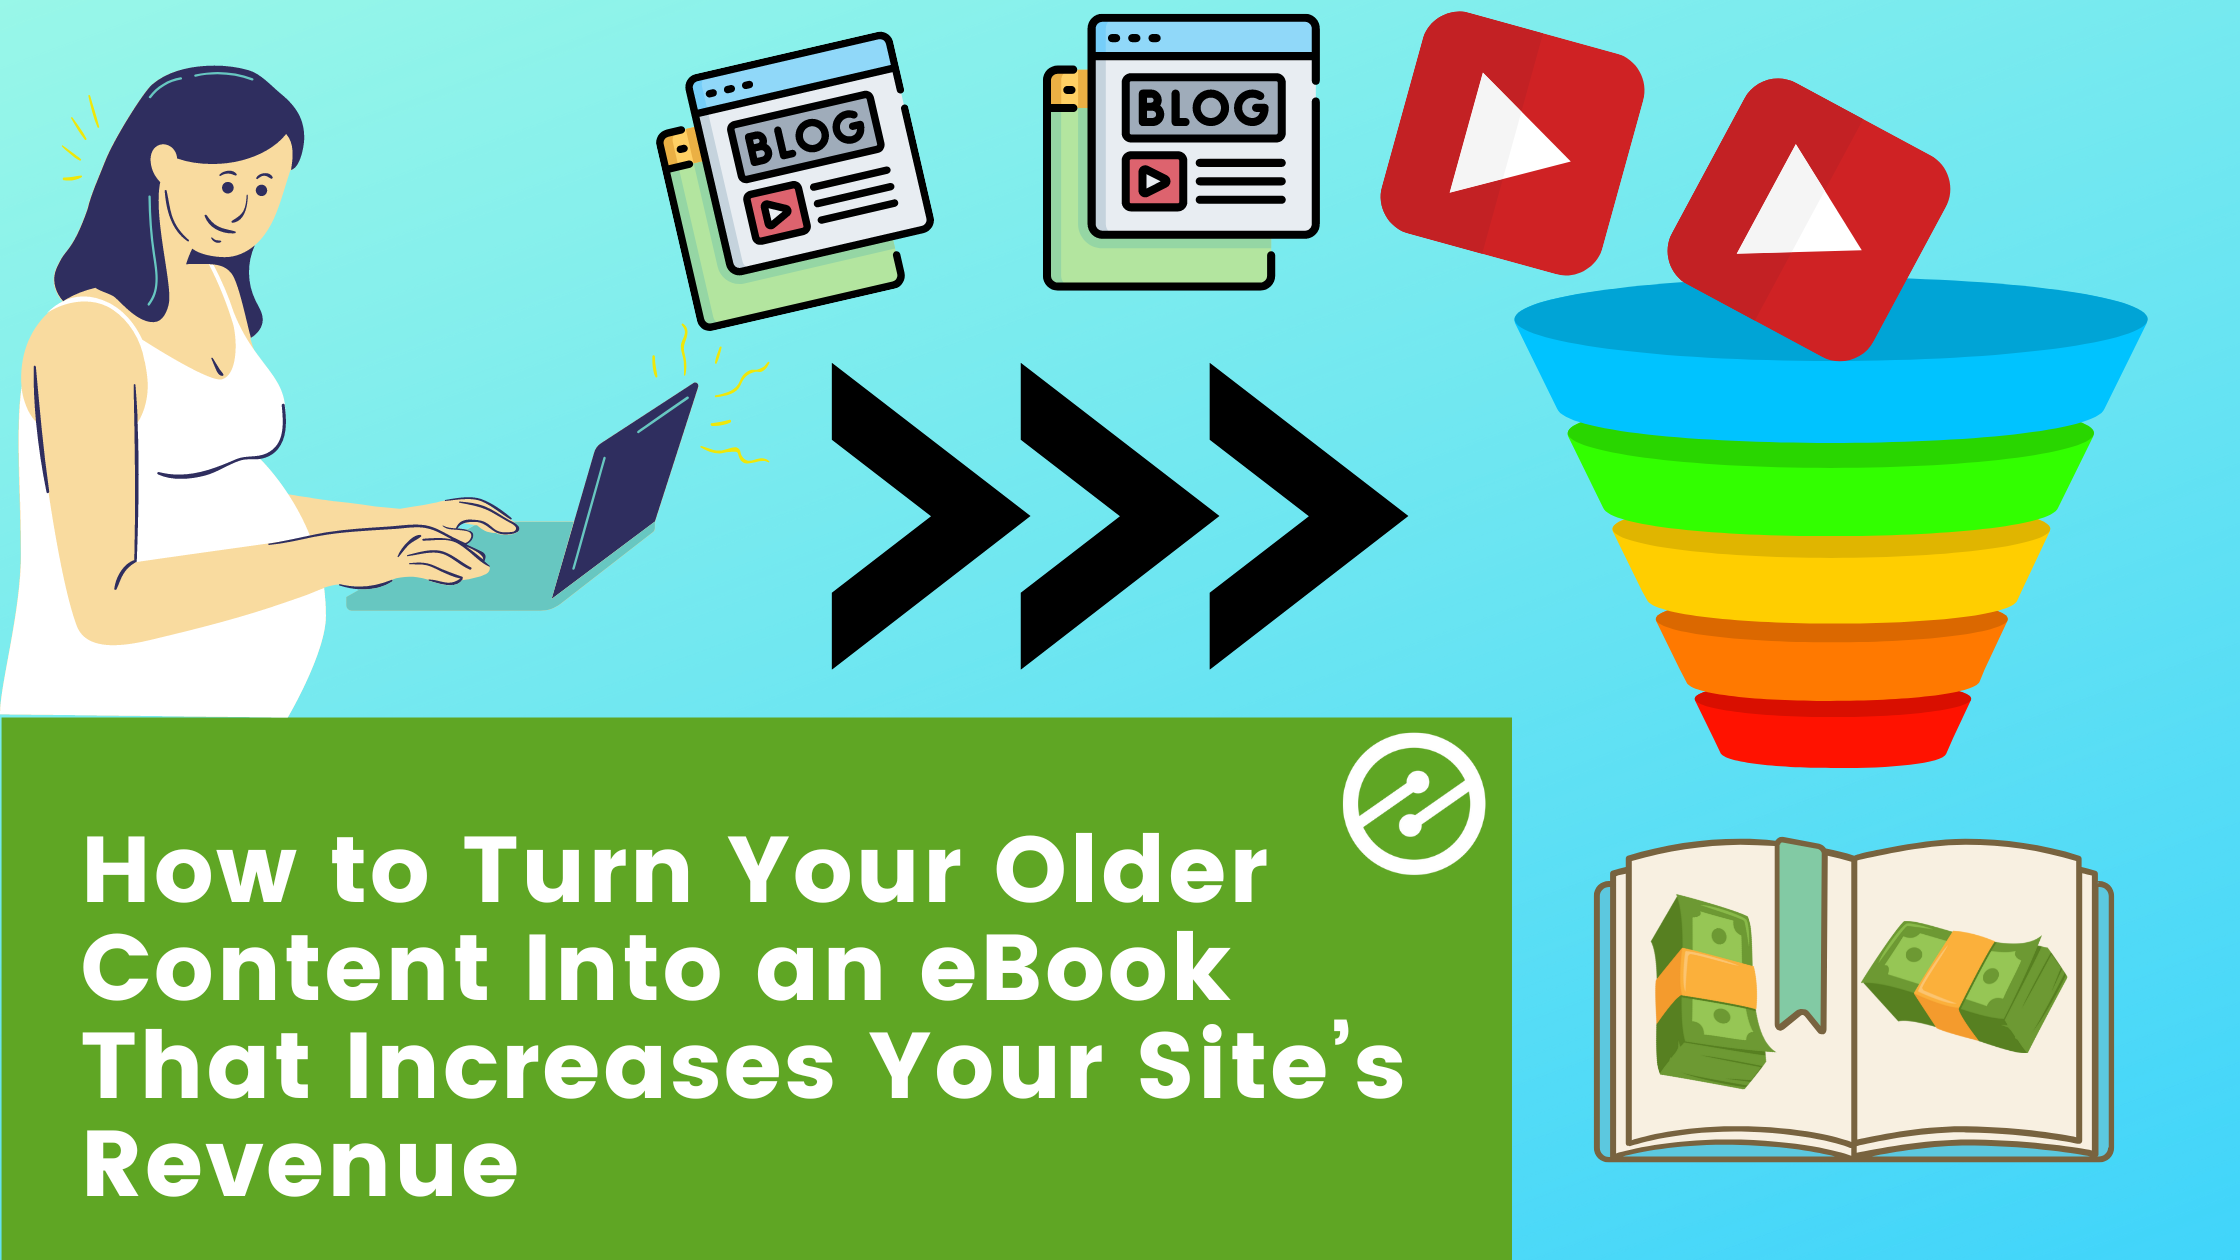 4 Steps to Turn Your Older Content Into an eBook That Increases Your Site’s Revenue